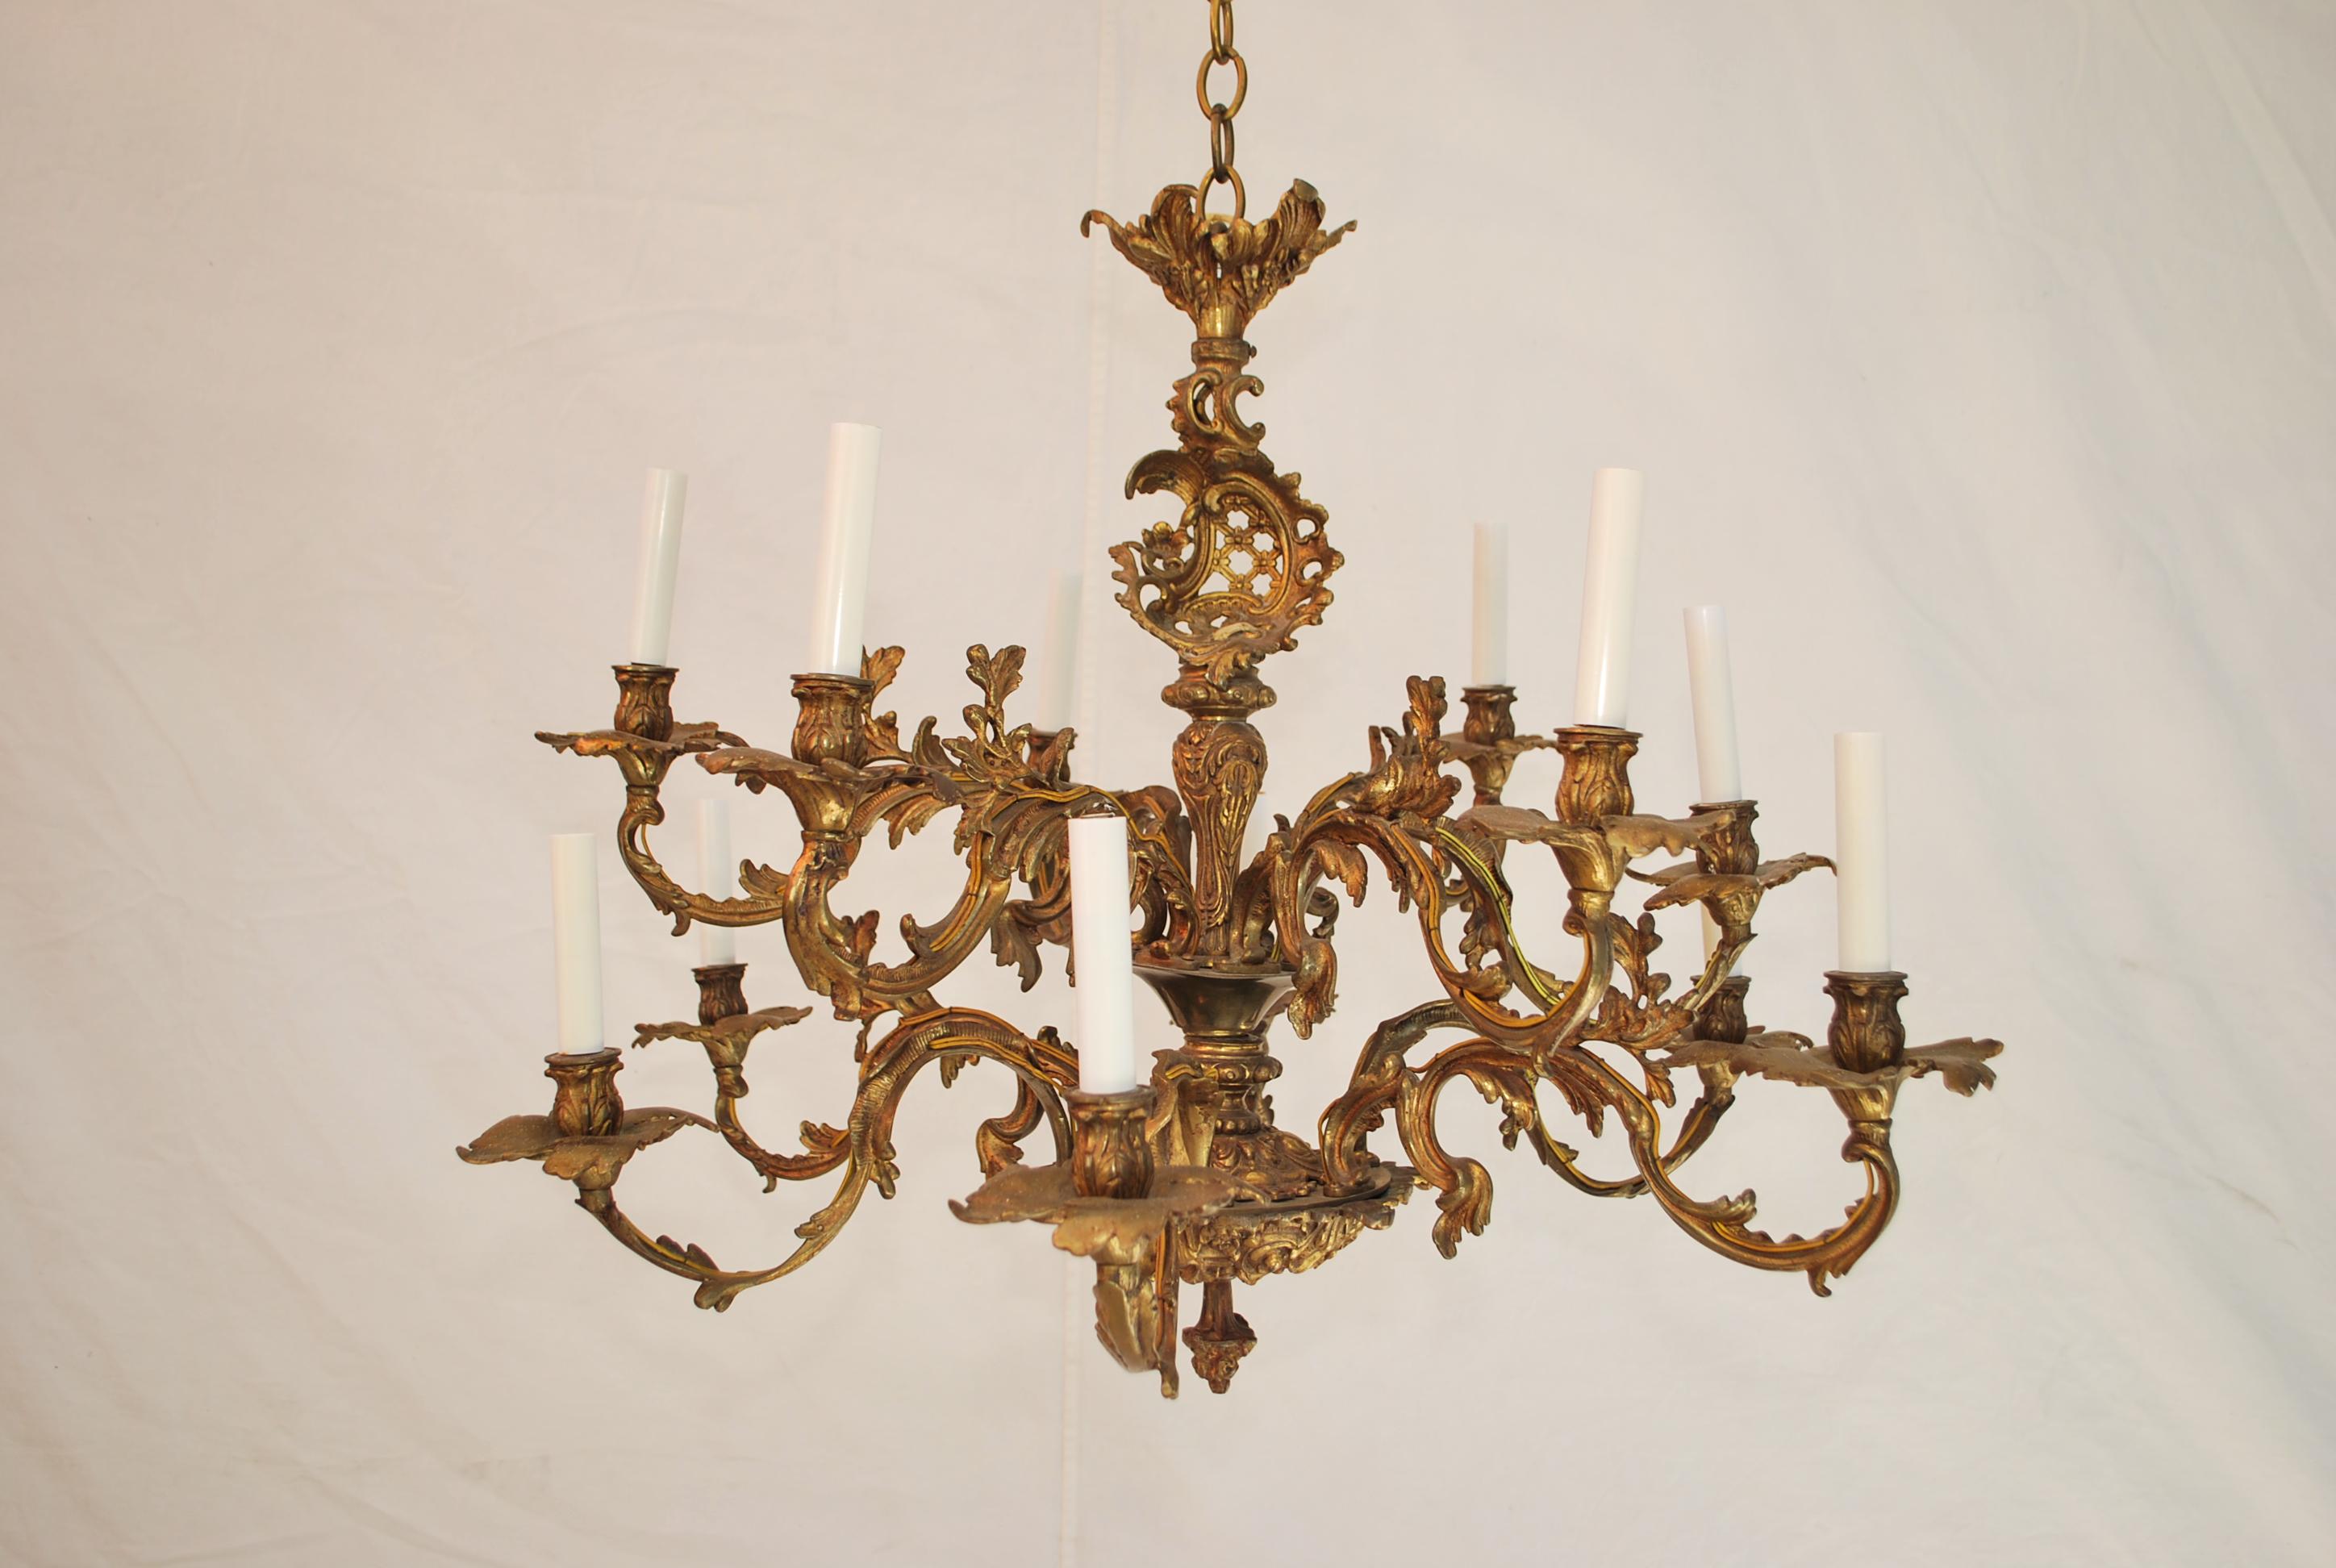 A beautiful French bronze chandelier, the patina is so nicer in person